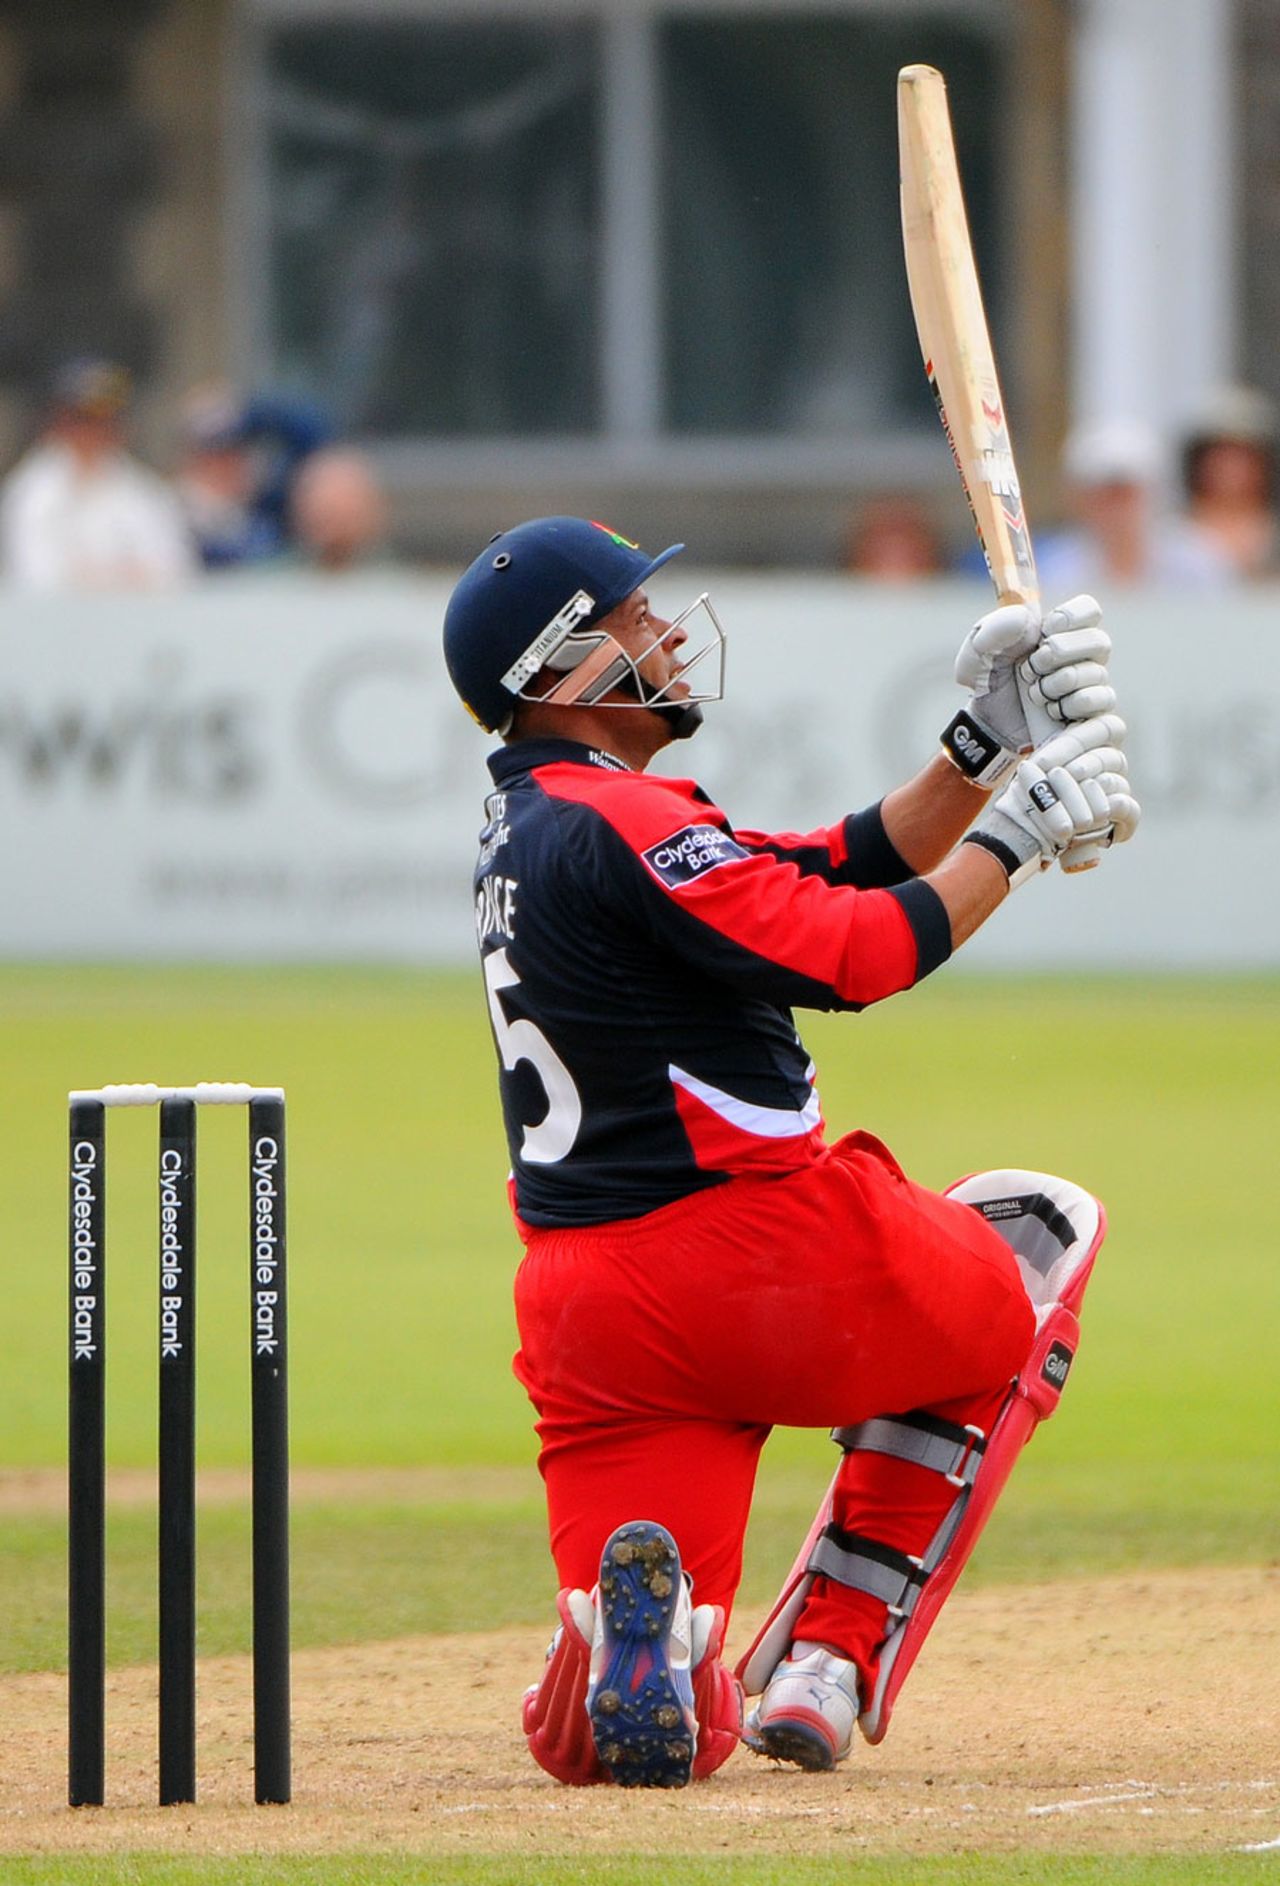 Ashwell Prince made 25 opening the batting, Gloucestershire v Lancashire, CB40 Group A, Bristol, August 19, 2012